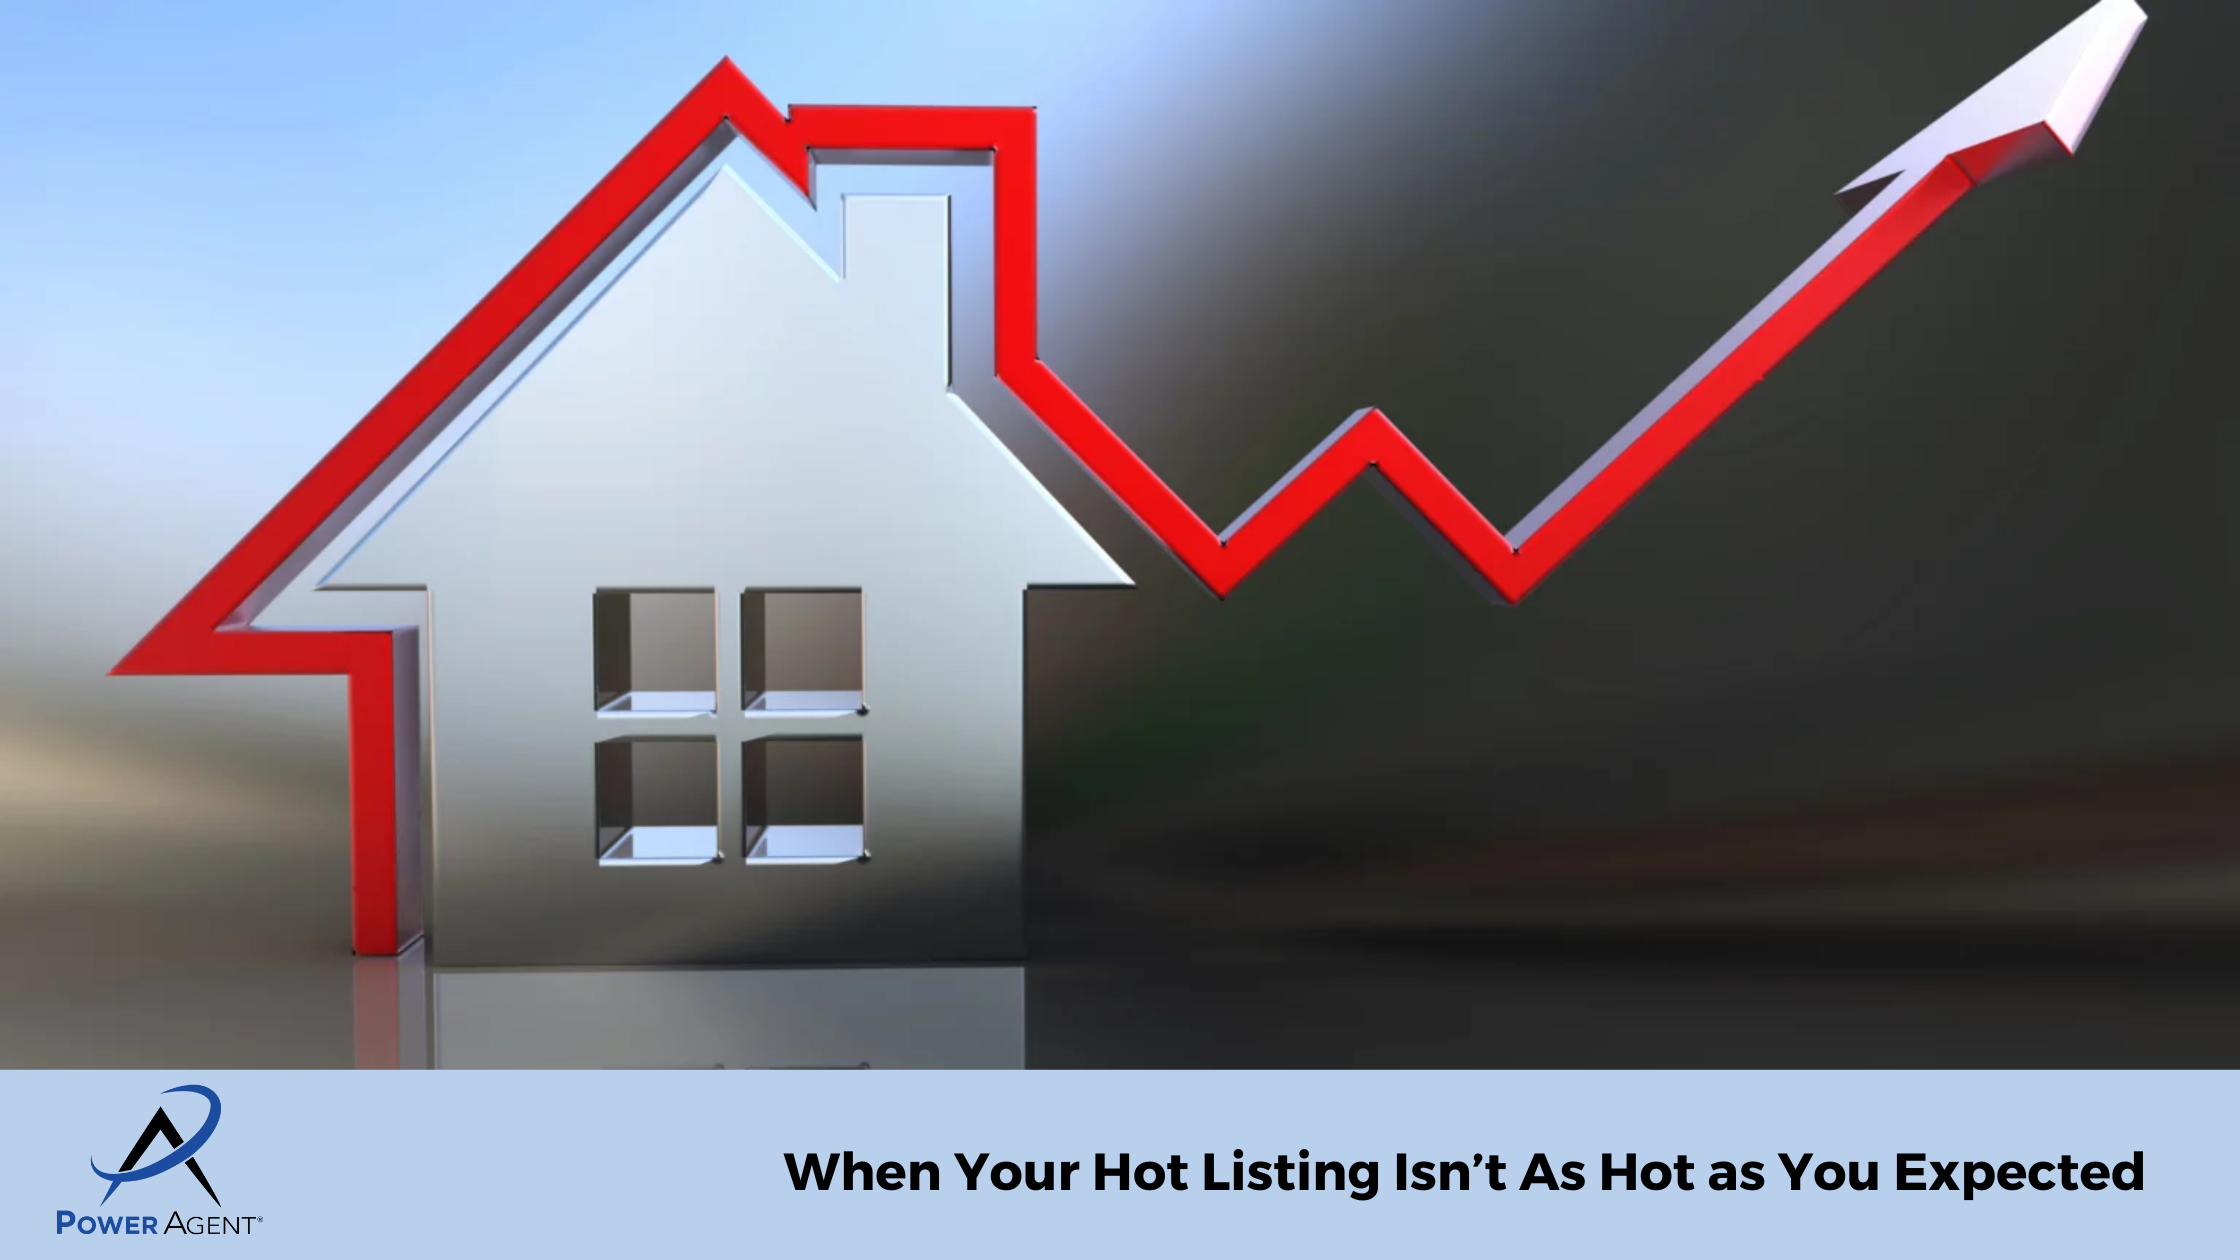 When Your Hot Listing Isn’t As Hot as You Expected